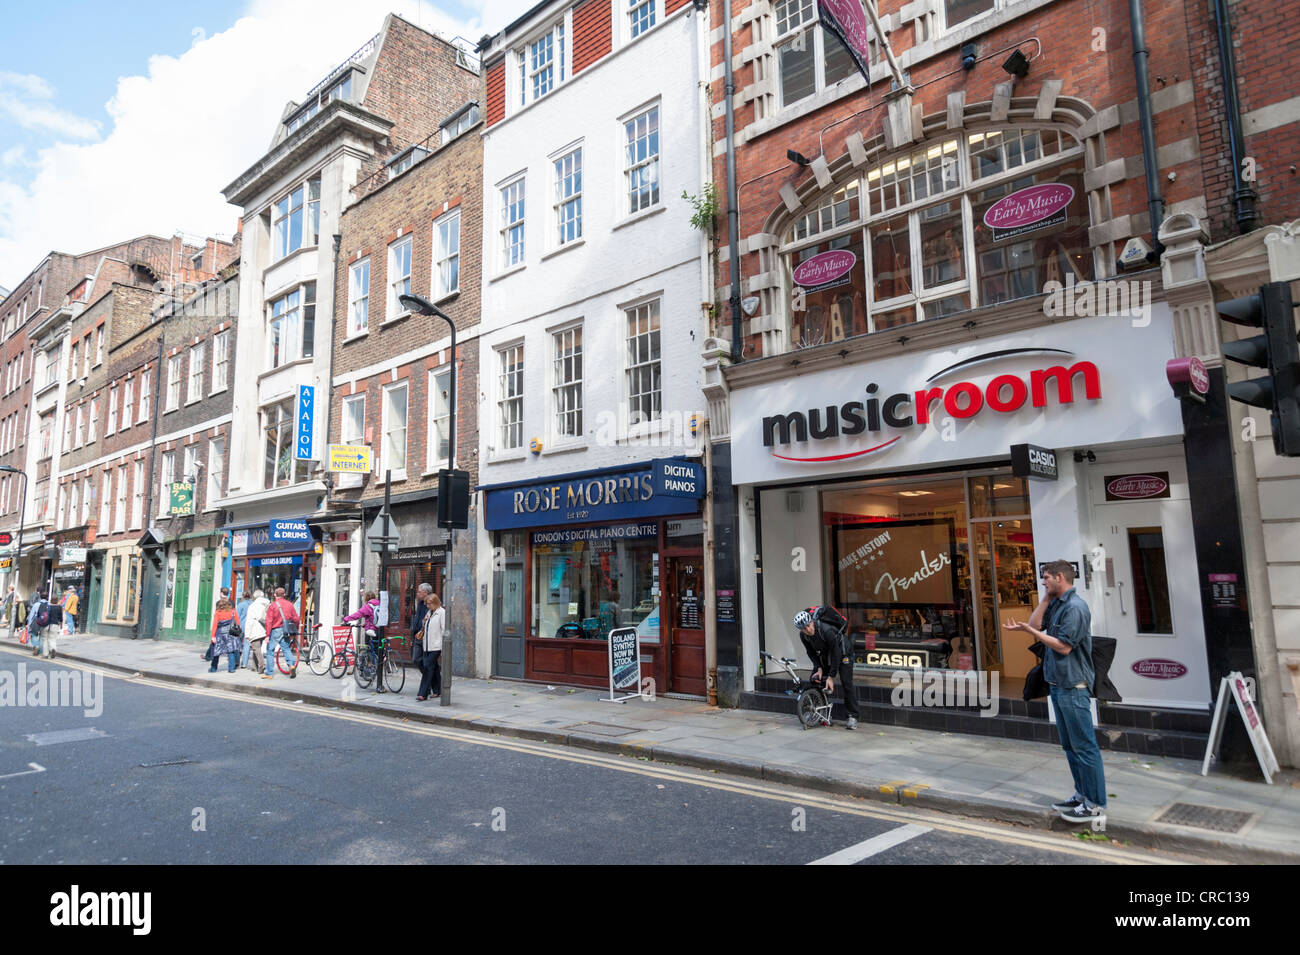 Street scene in Denmark Street London sometimes called tin pan alley famous for its many guitar and musical instrument shops Stock Photo